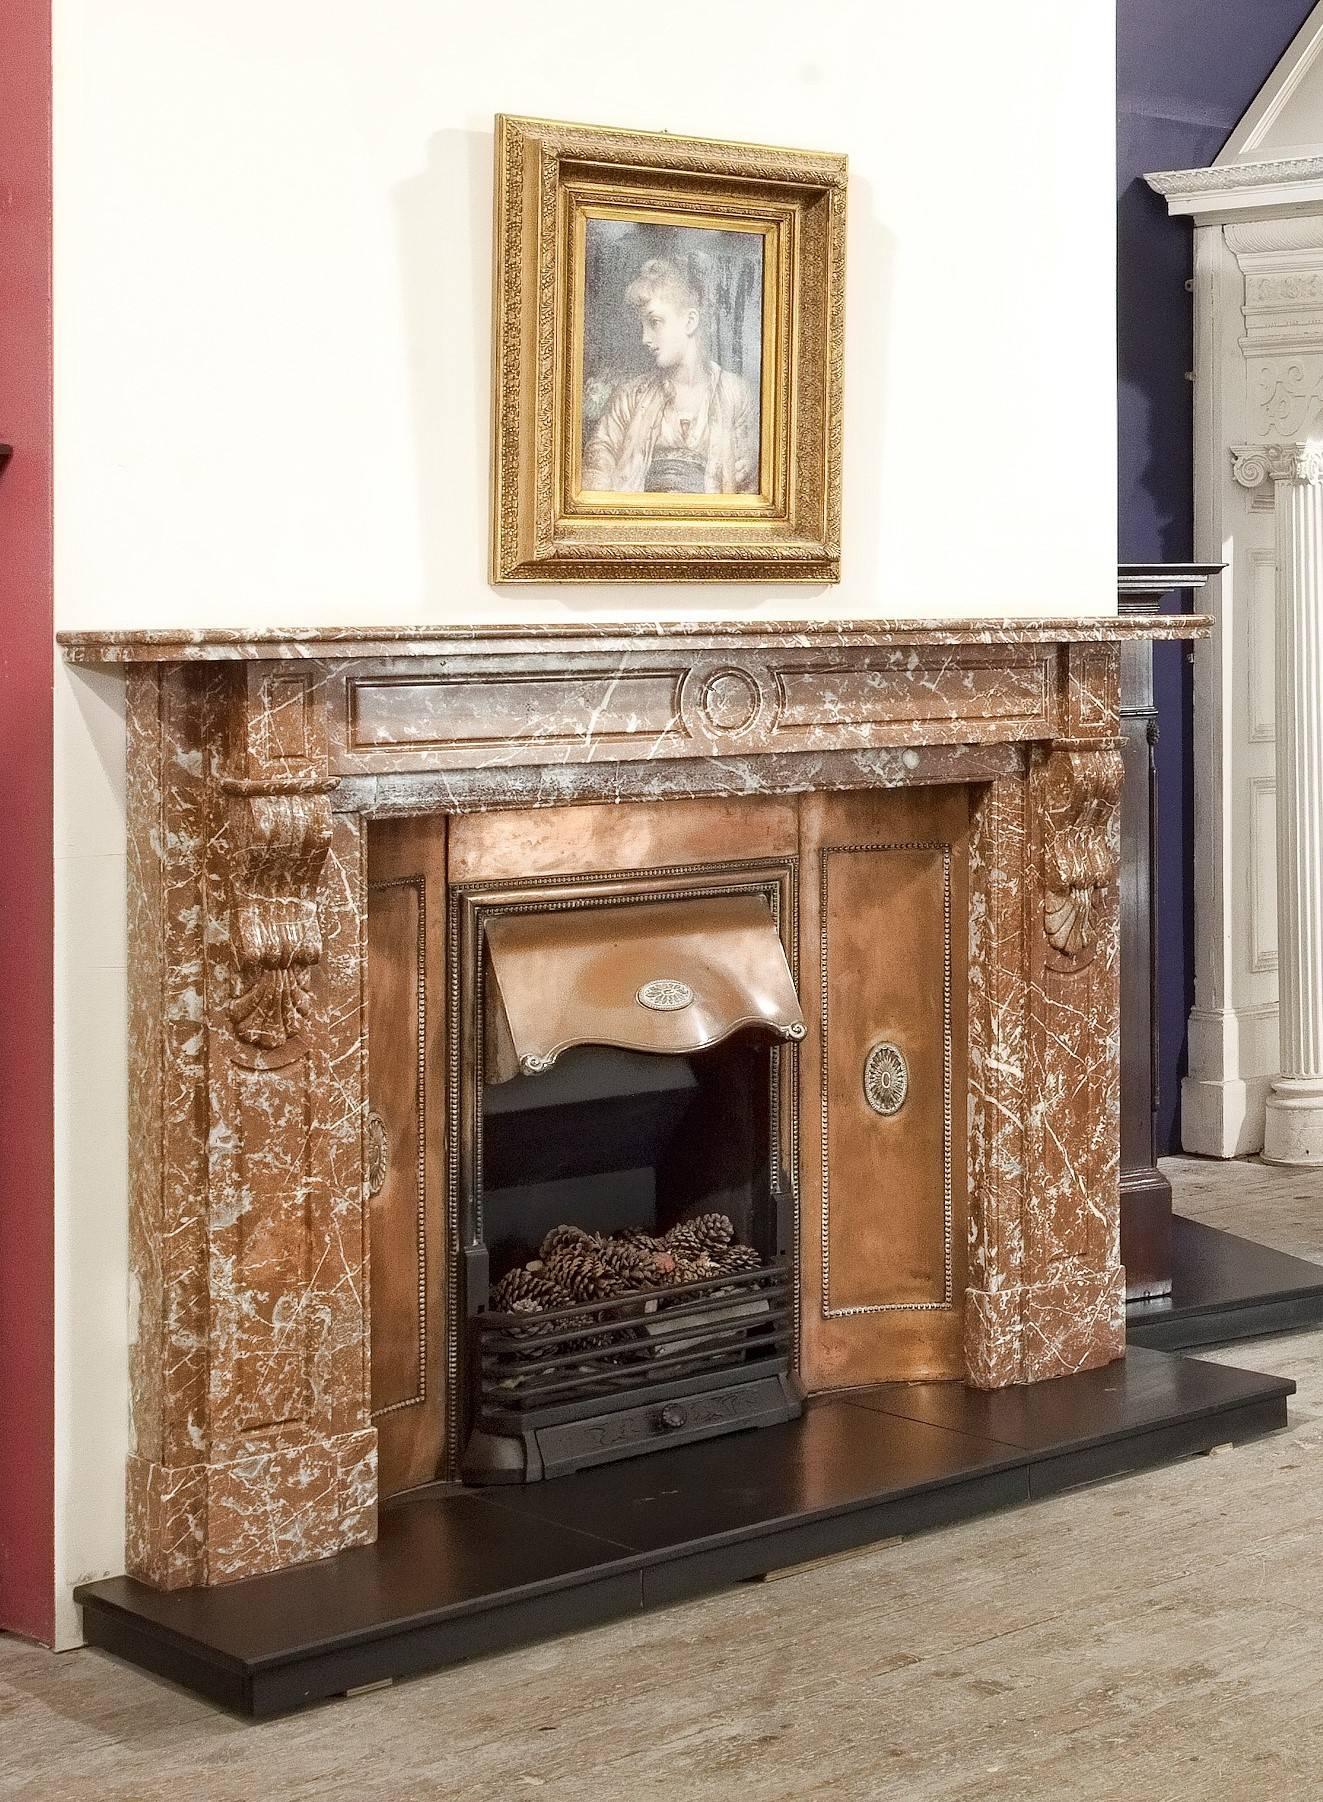 This Victorian breche marble fireplace surround has hand-carved recessed panels on the jambs and frieze with carved centre circle, the carved corbels supports the two-tier mantel. The marble fire surround is complimented with the original interior